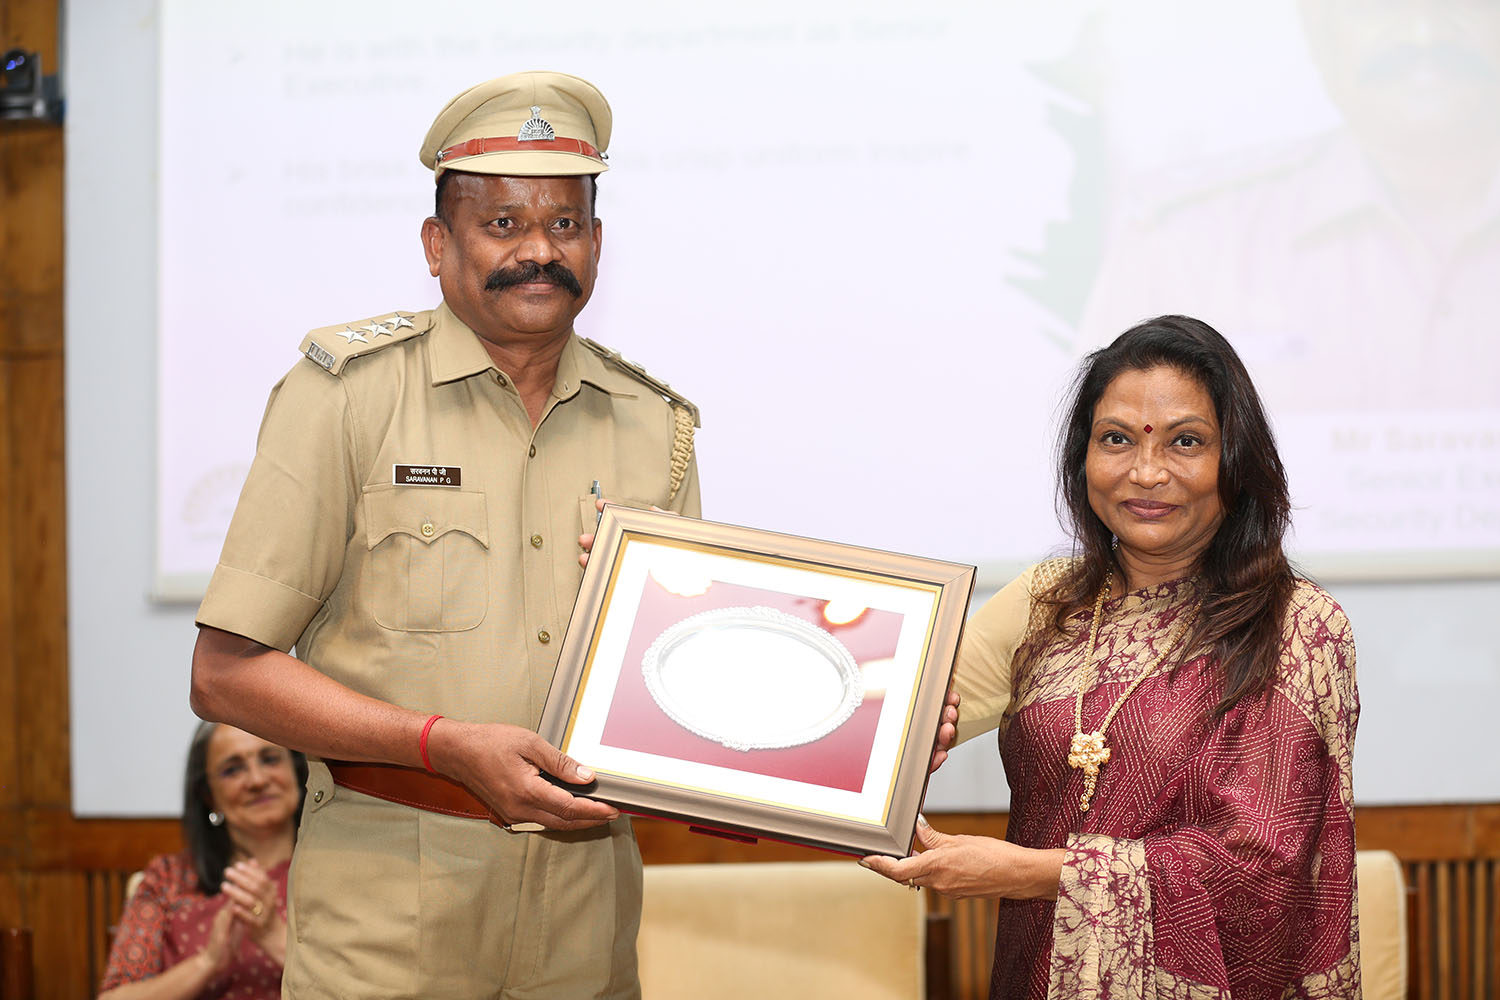 Mr Saravanan PG, Senior Executive, Security department, receives the award for 30 years of service from Ms. Kalpana Saroj, Member of the Board of Governors, IIMB, during the institute’s 49th Foundation Day celebrations.